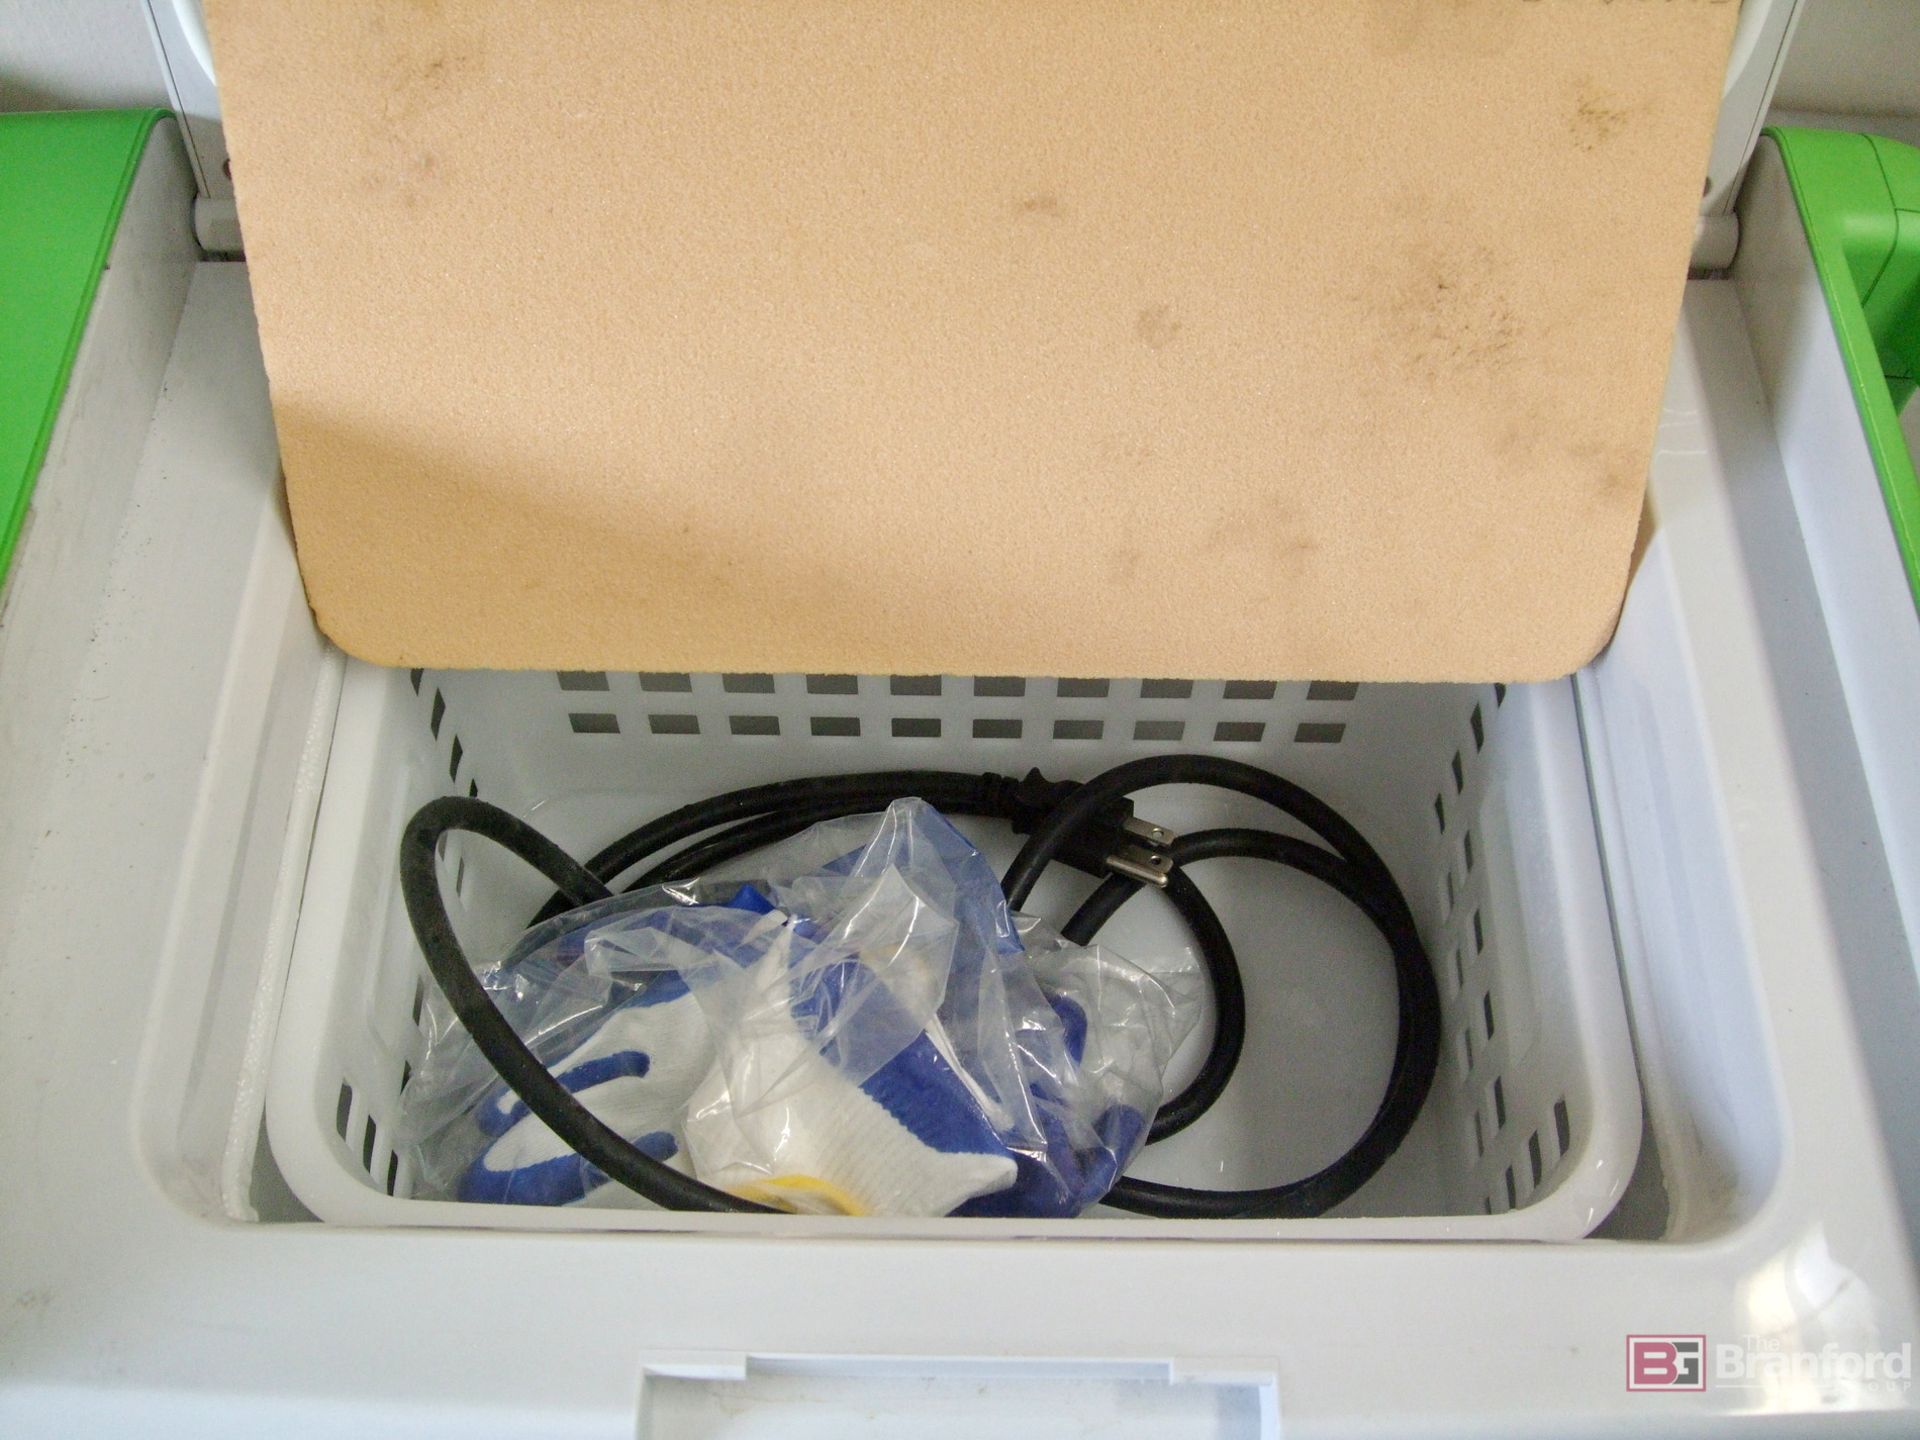 Stirling Ultracold ULT25NEU Ultra-Low Temperature Freezer - USED - Image 5 of 8